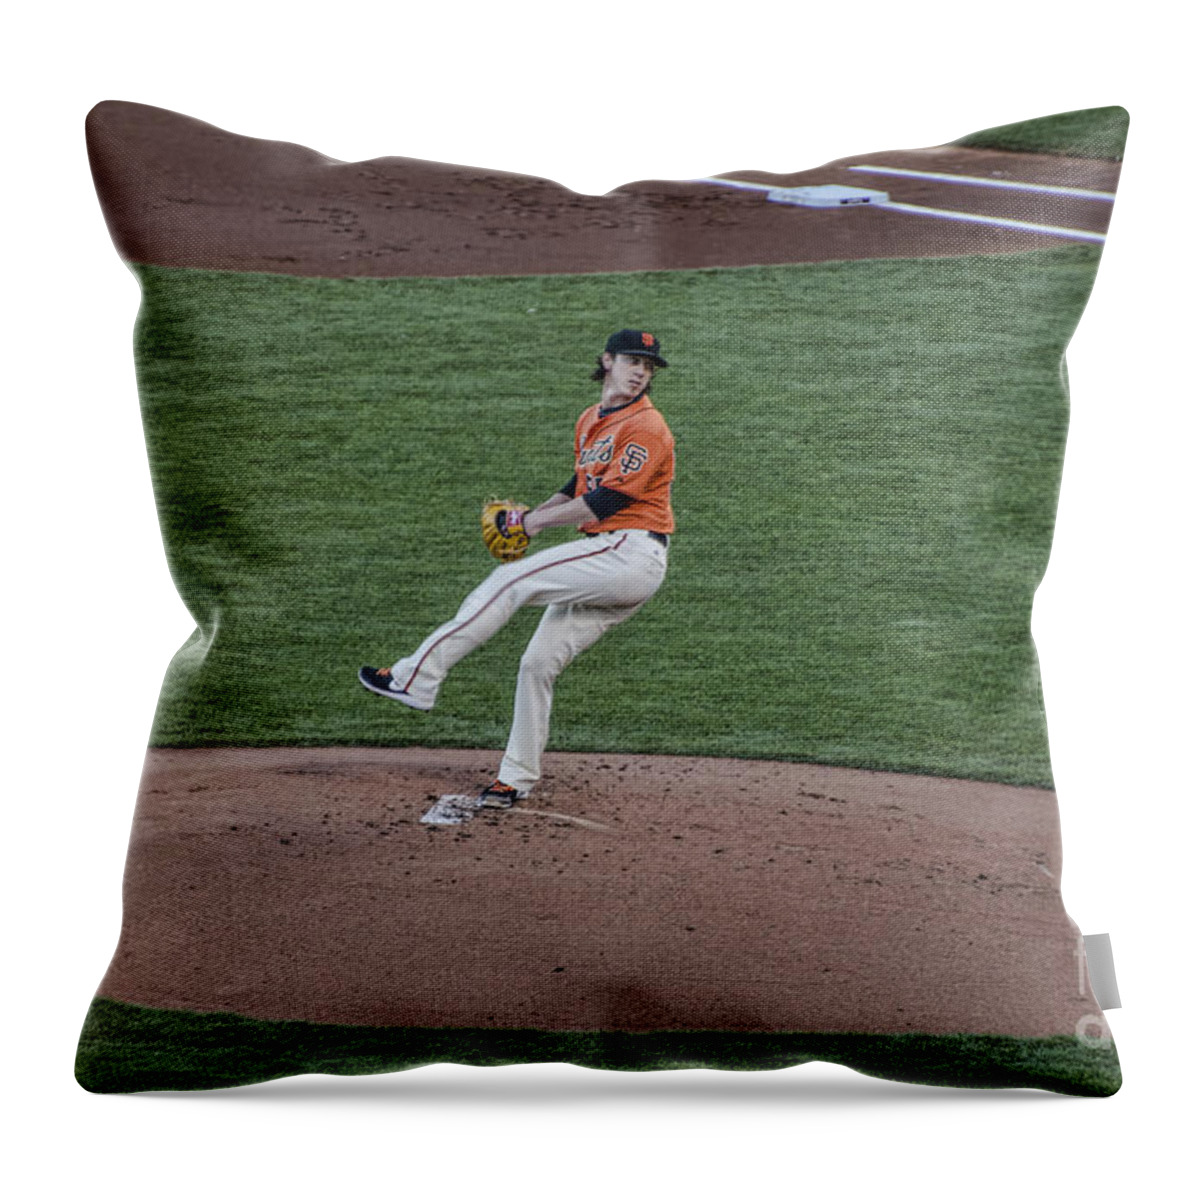  Baseball Throw Pillow featuring the photograph The Big Pitcher by Judy Wolinsky